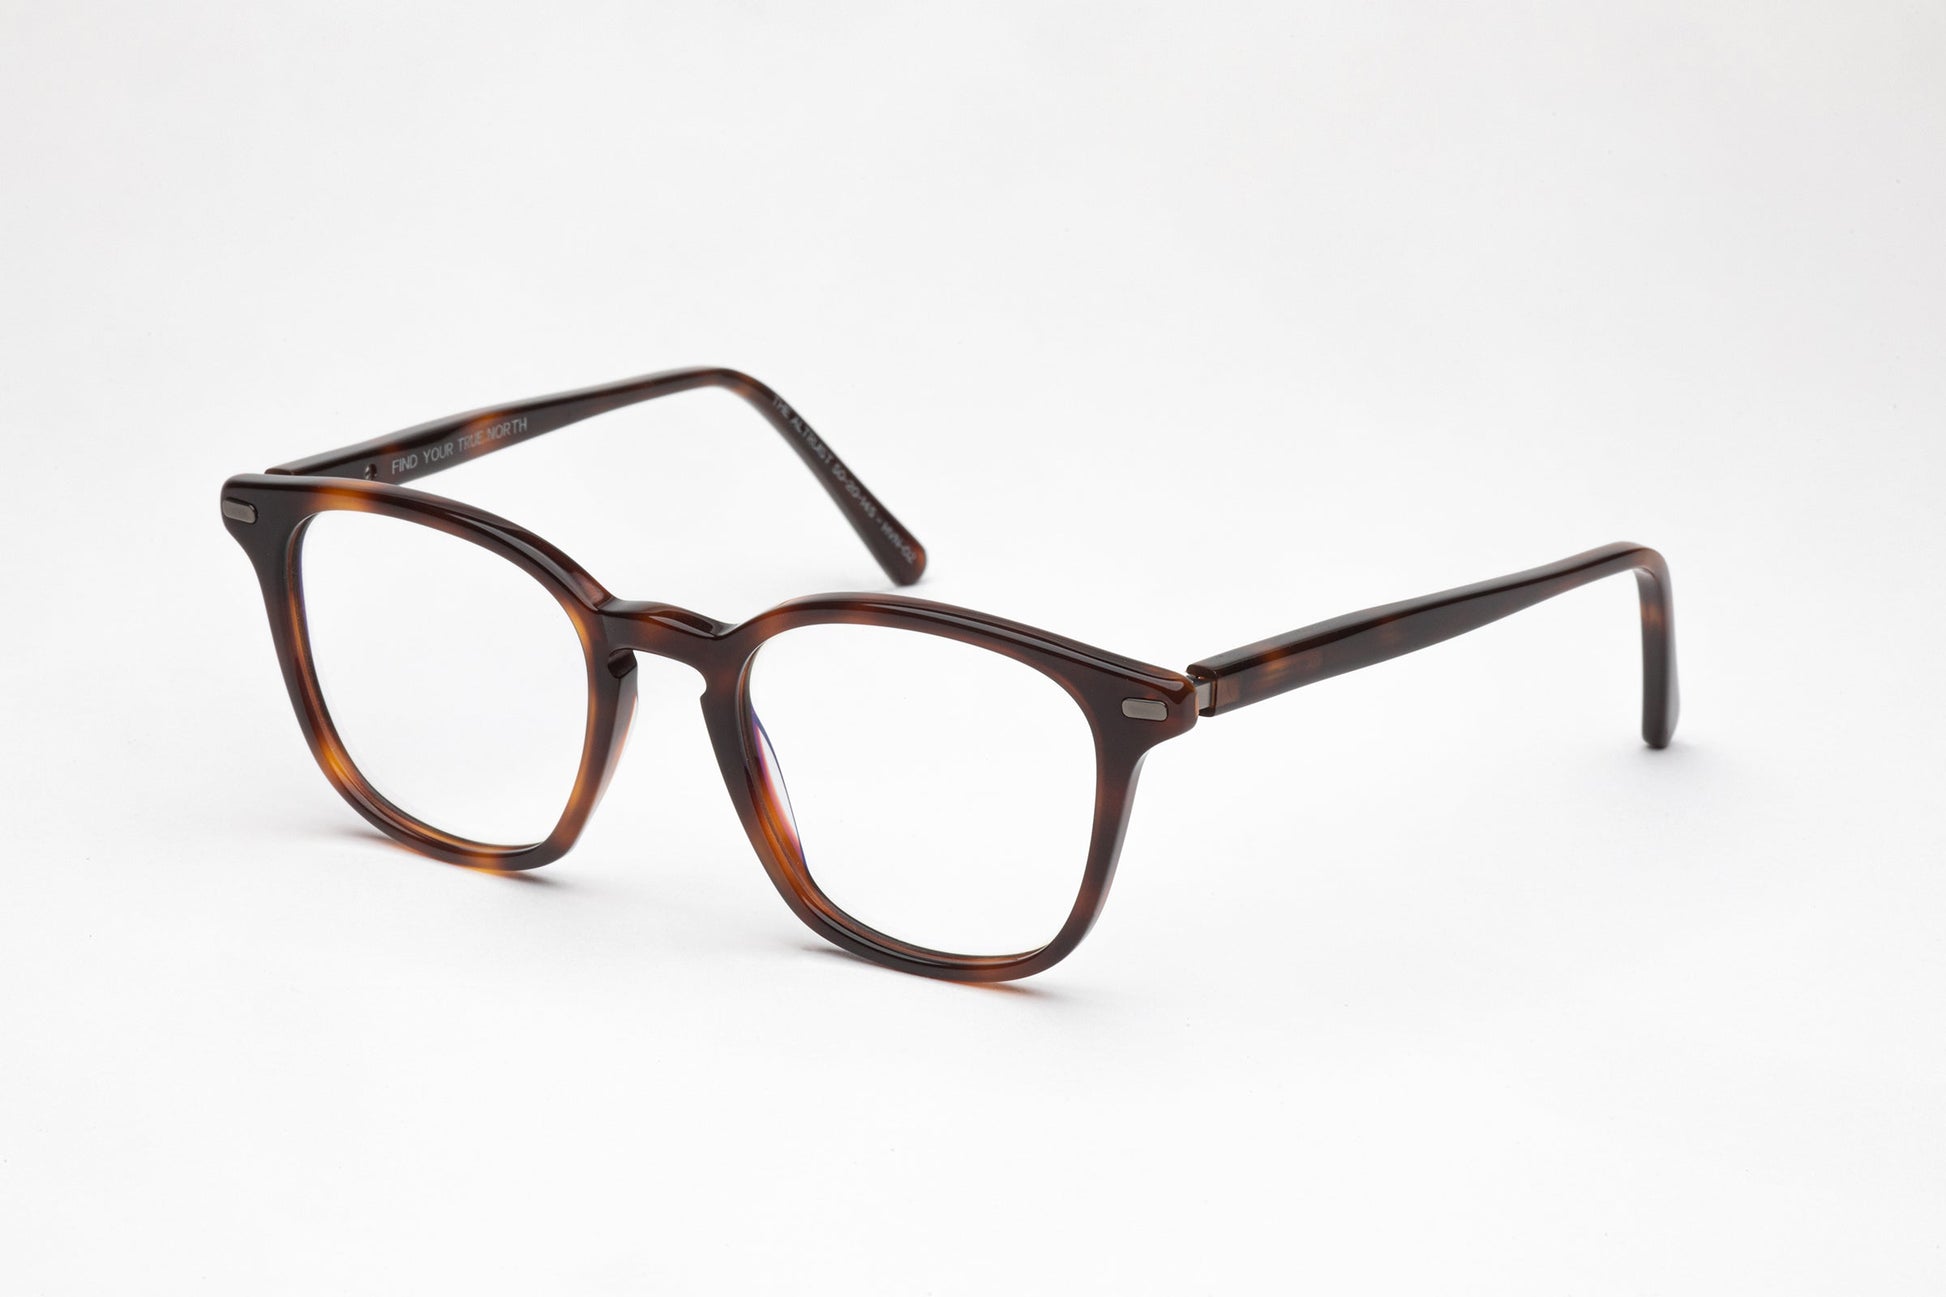 Angled view of The Advocate tortoiseshell rectangle glasses